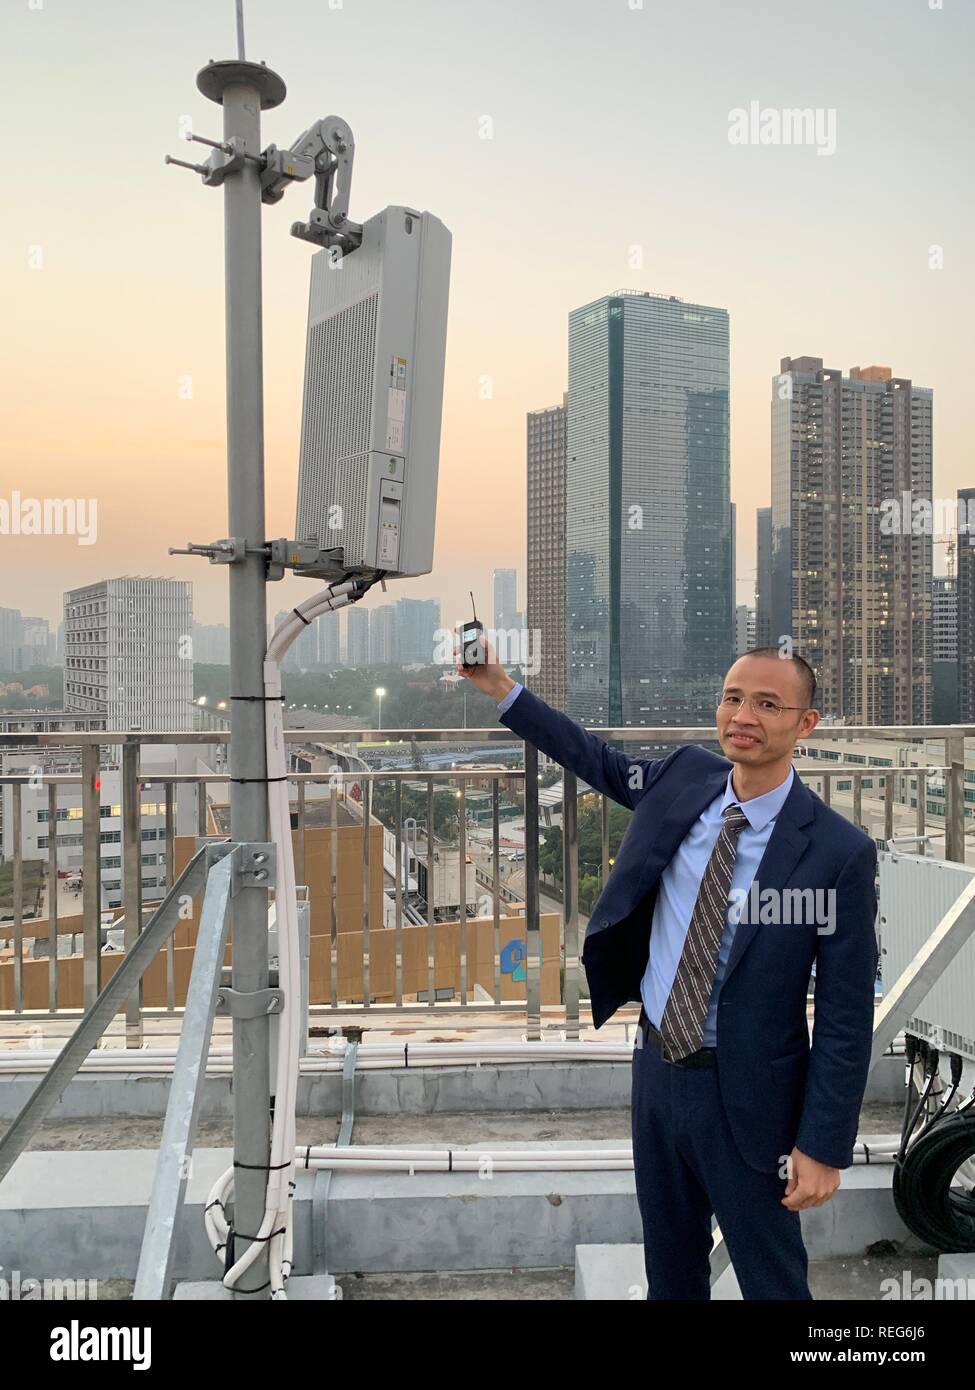 Shenzhen, China. 21st Jan, 2019. An employee of the Chinese mobile operator China Telecom shows a Huawei base station for the new 5G network standing on the roof of a high-rise building in the Nanshan district. In Shenzhen, where Huawei is also headquartered, there are already several hundred 5G stations. China is pushing ahead massively with the expansion of the new mobile communications standard, which transports data faster and in much larger volumes. Credit: Andreas Landwehr/dpa/Alamy Live News Stock Photo